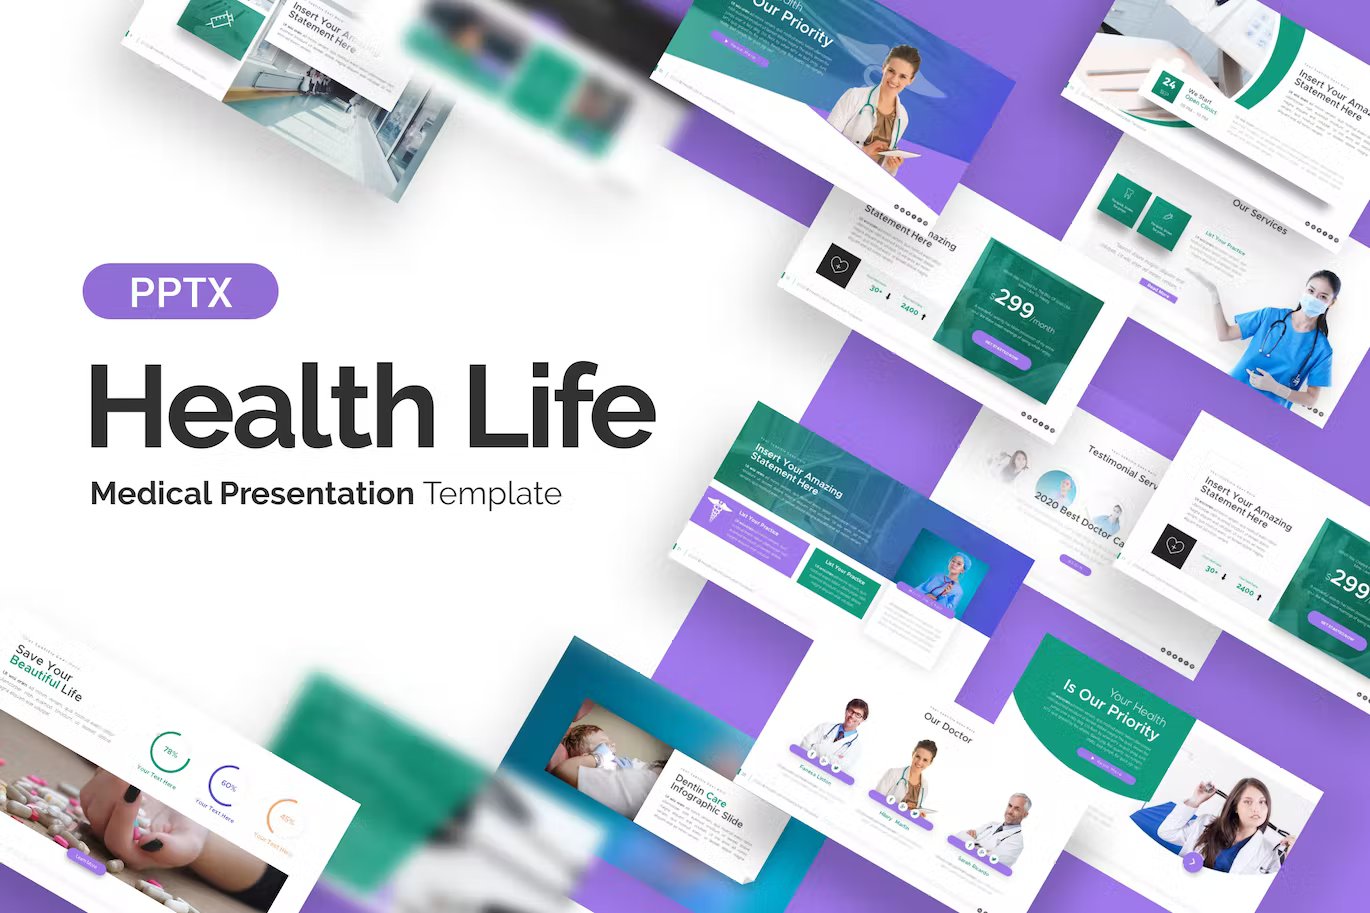 Black lettering "Health Life Medical Presentation Template" and different presentation templates on a white and purple background.